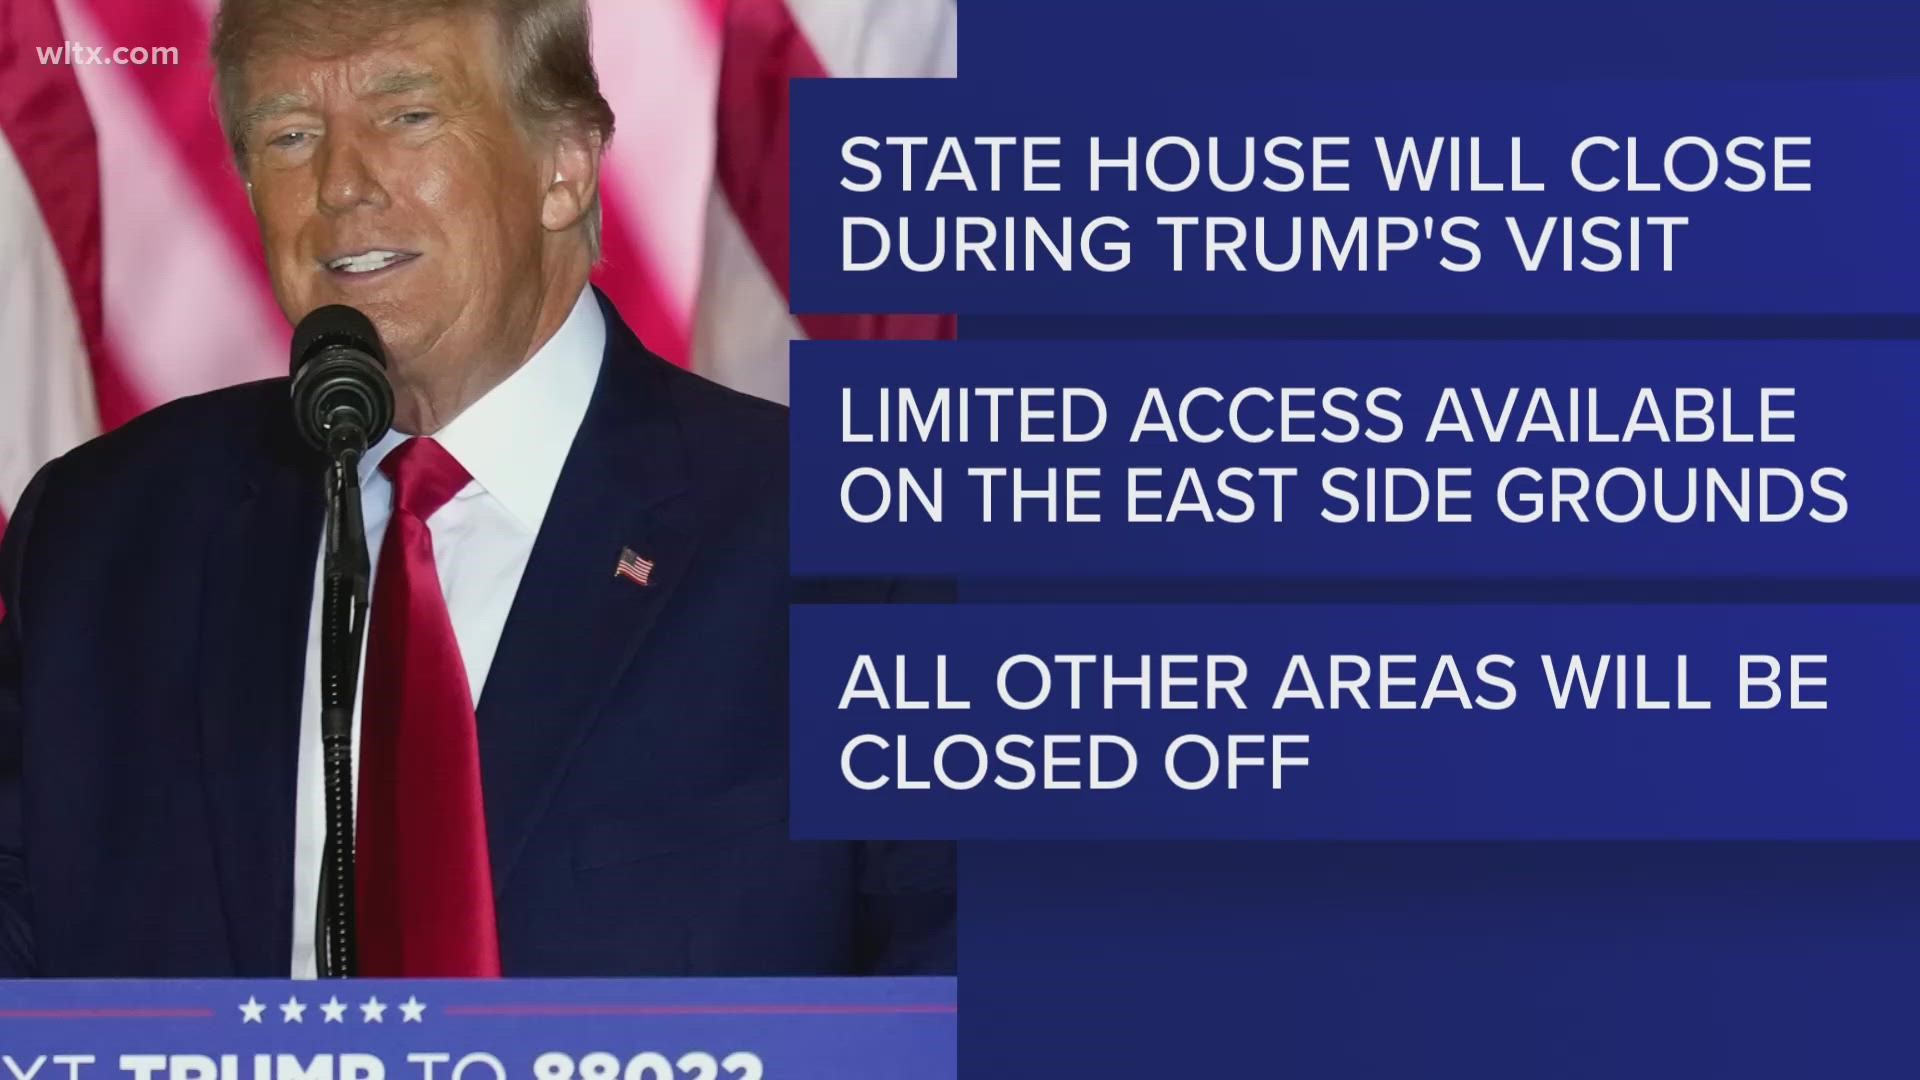 Starting at noon on Saturday, roads around Columbia will be closed in preparation for former President Donald Trump's visit to the State House.